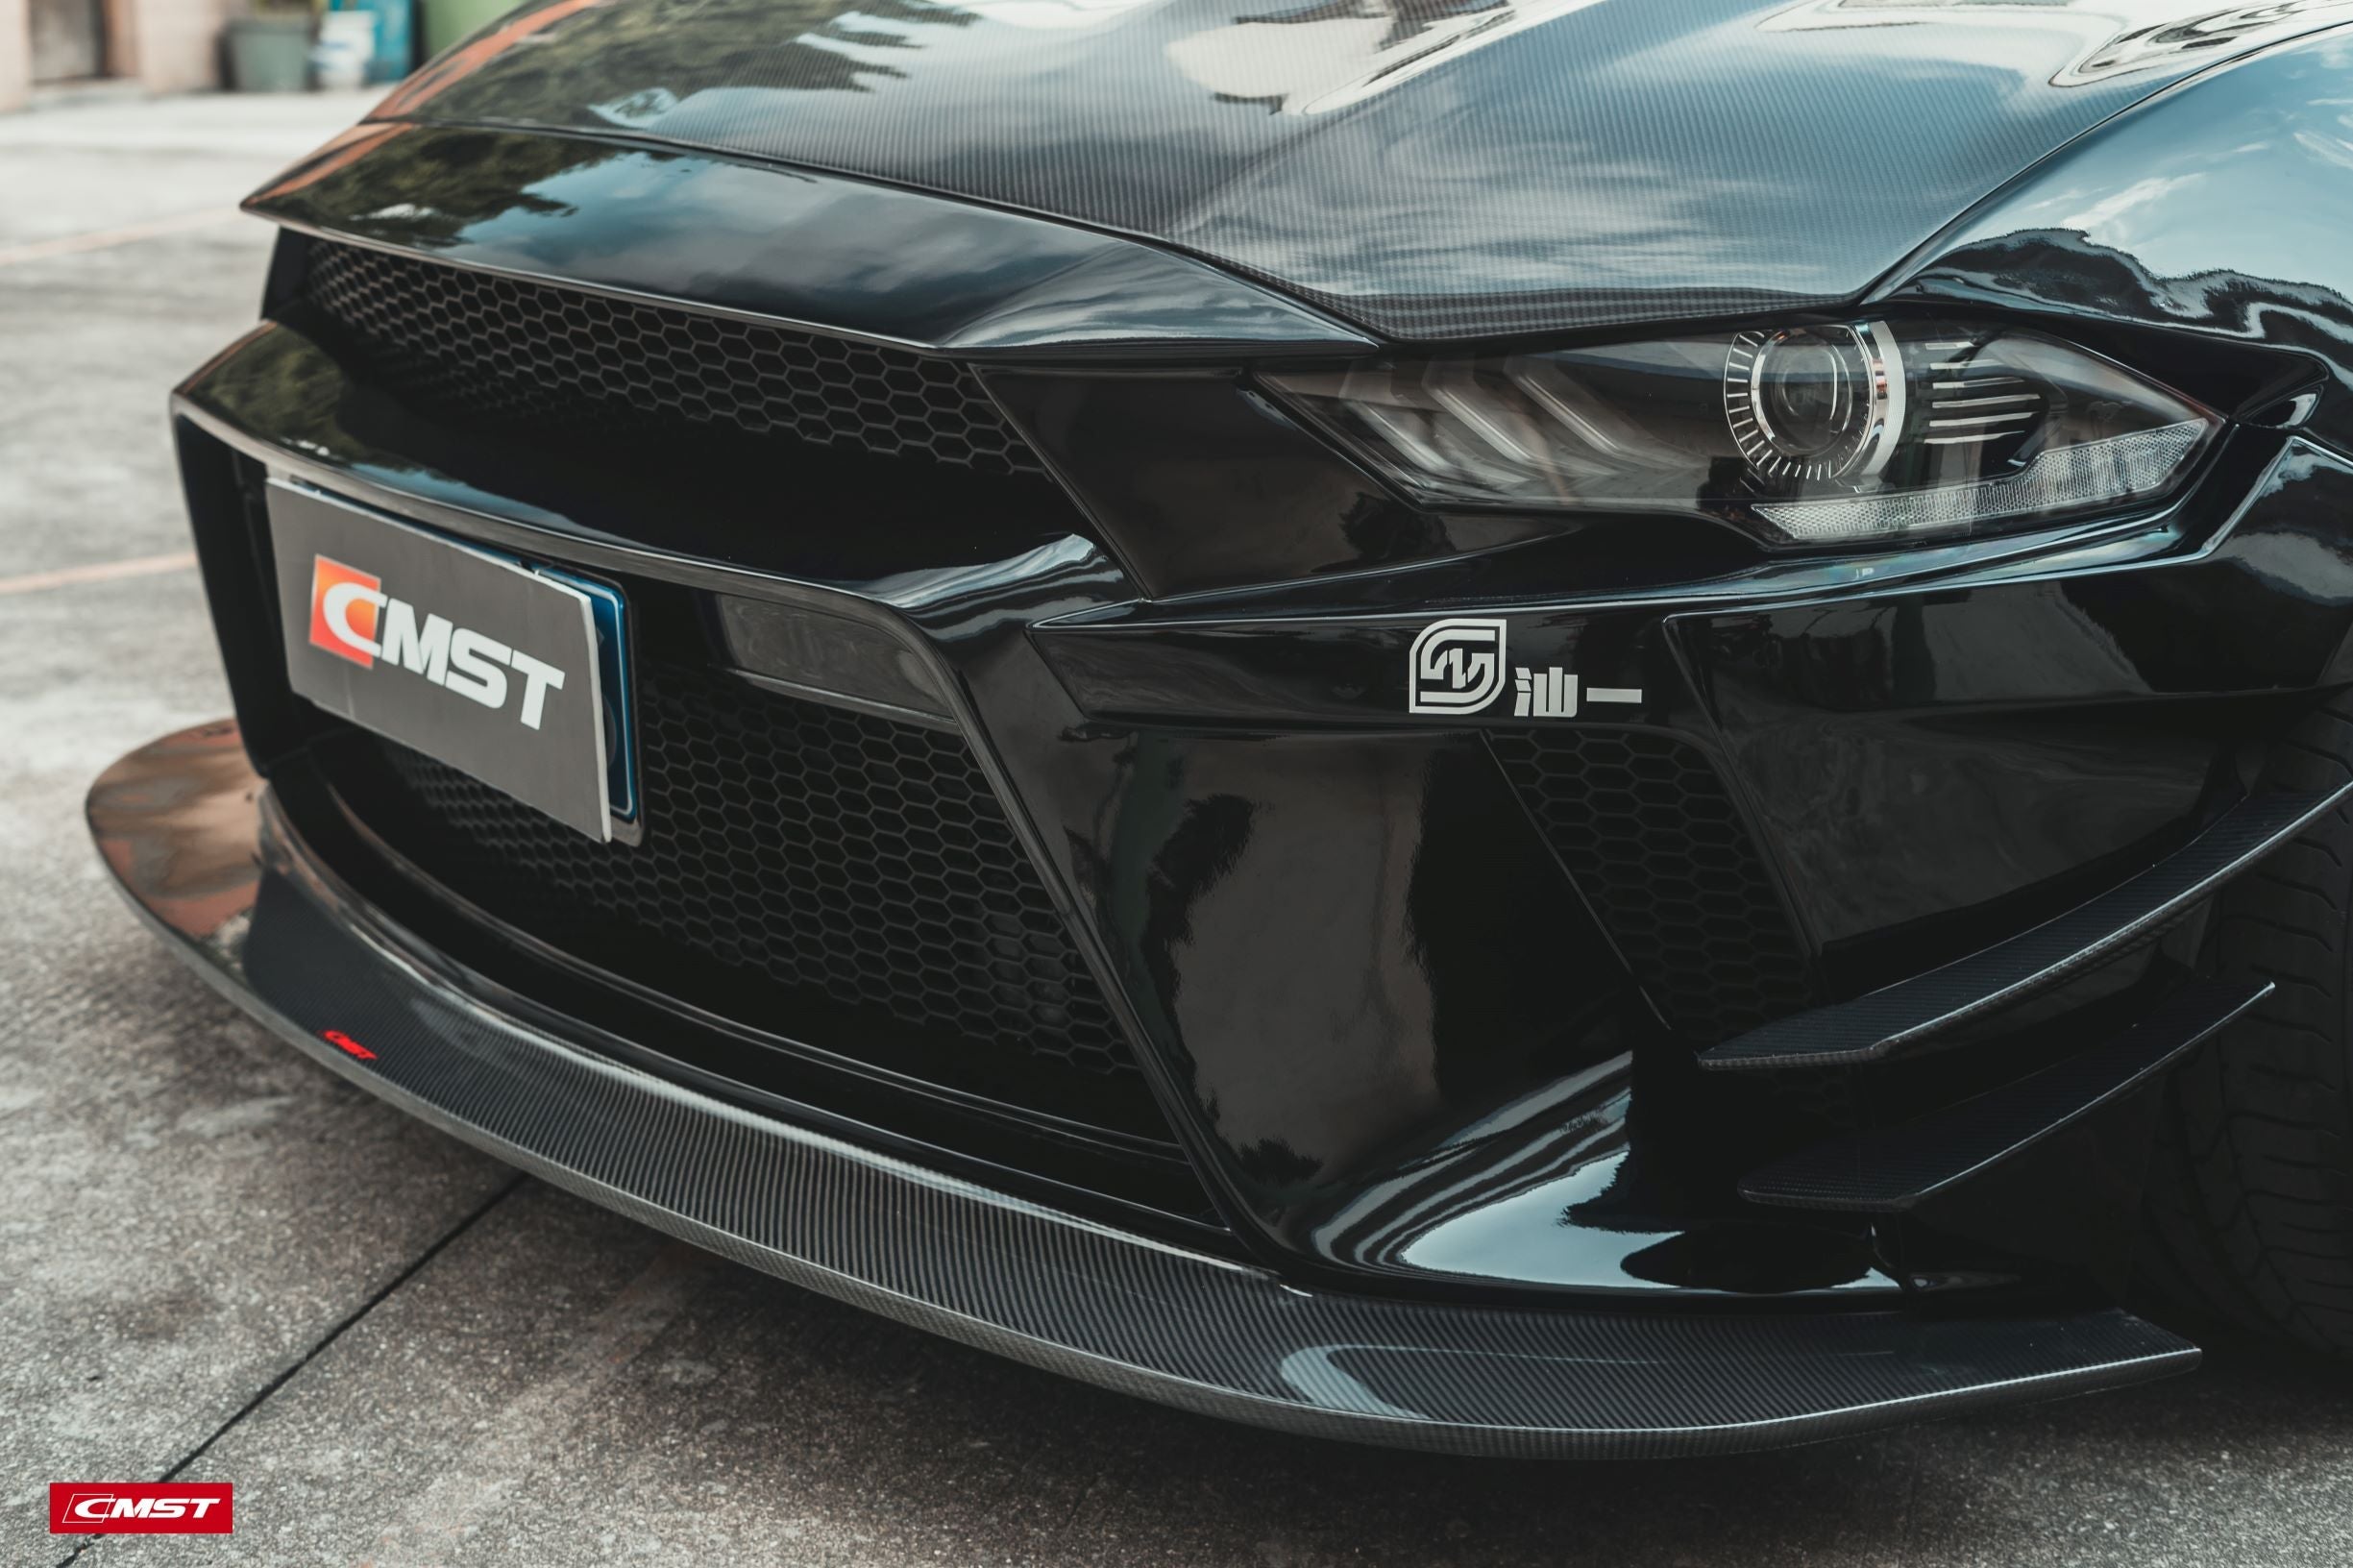 CMST Tuning Carbon Fiber Front Bumper & Front Lip for Ford Mustang S550.2 2018 - 2022